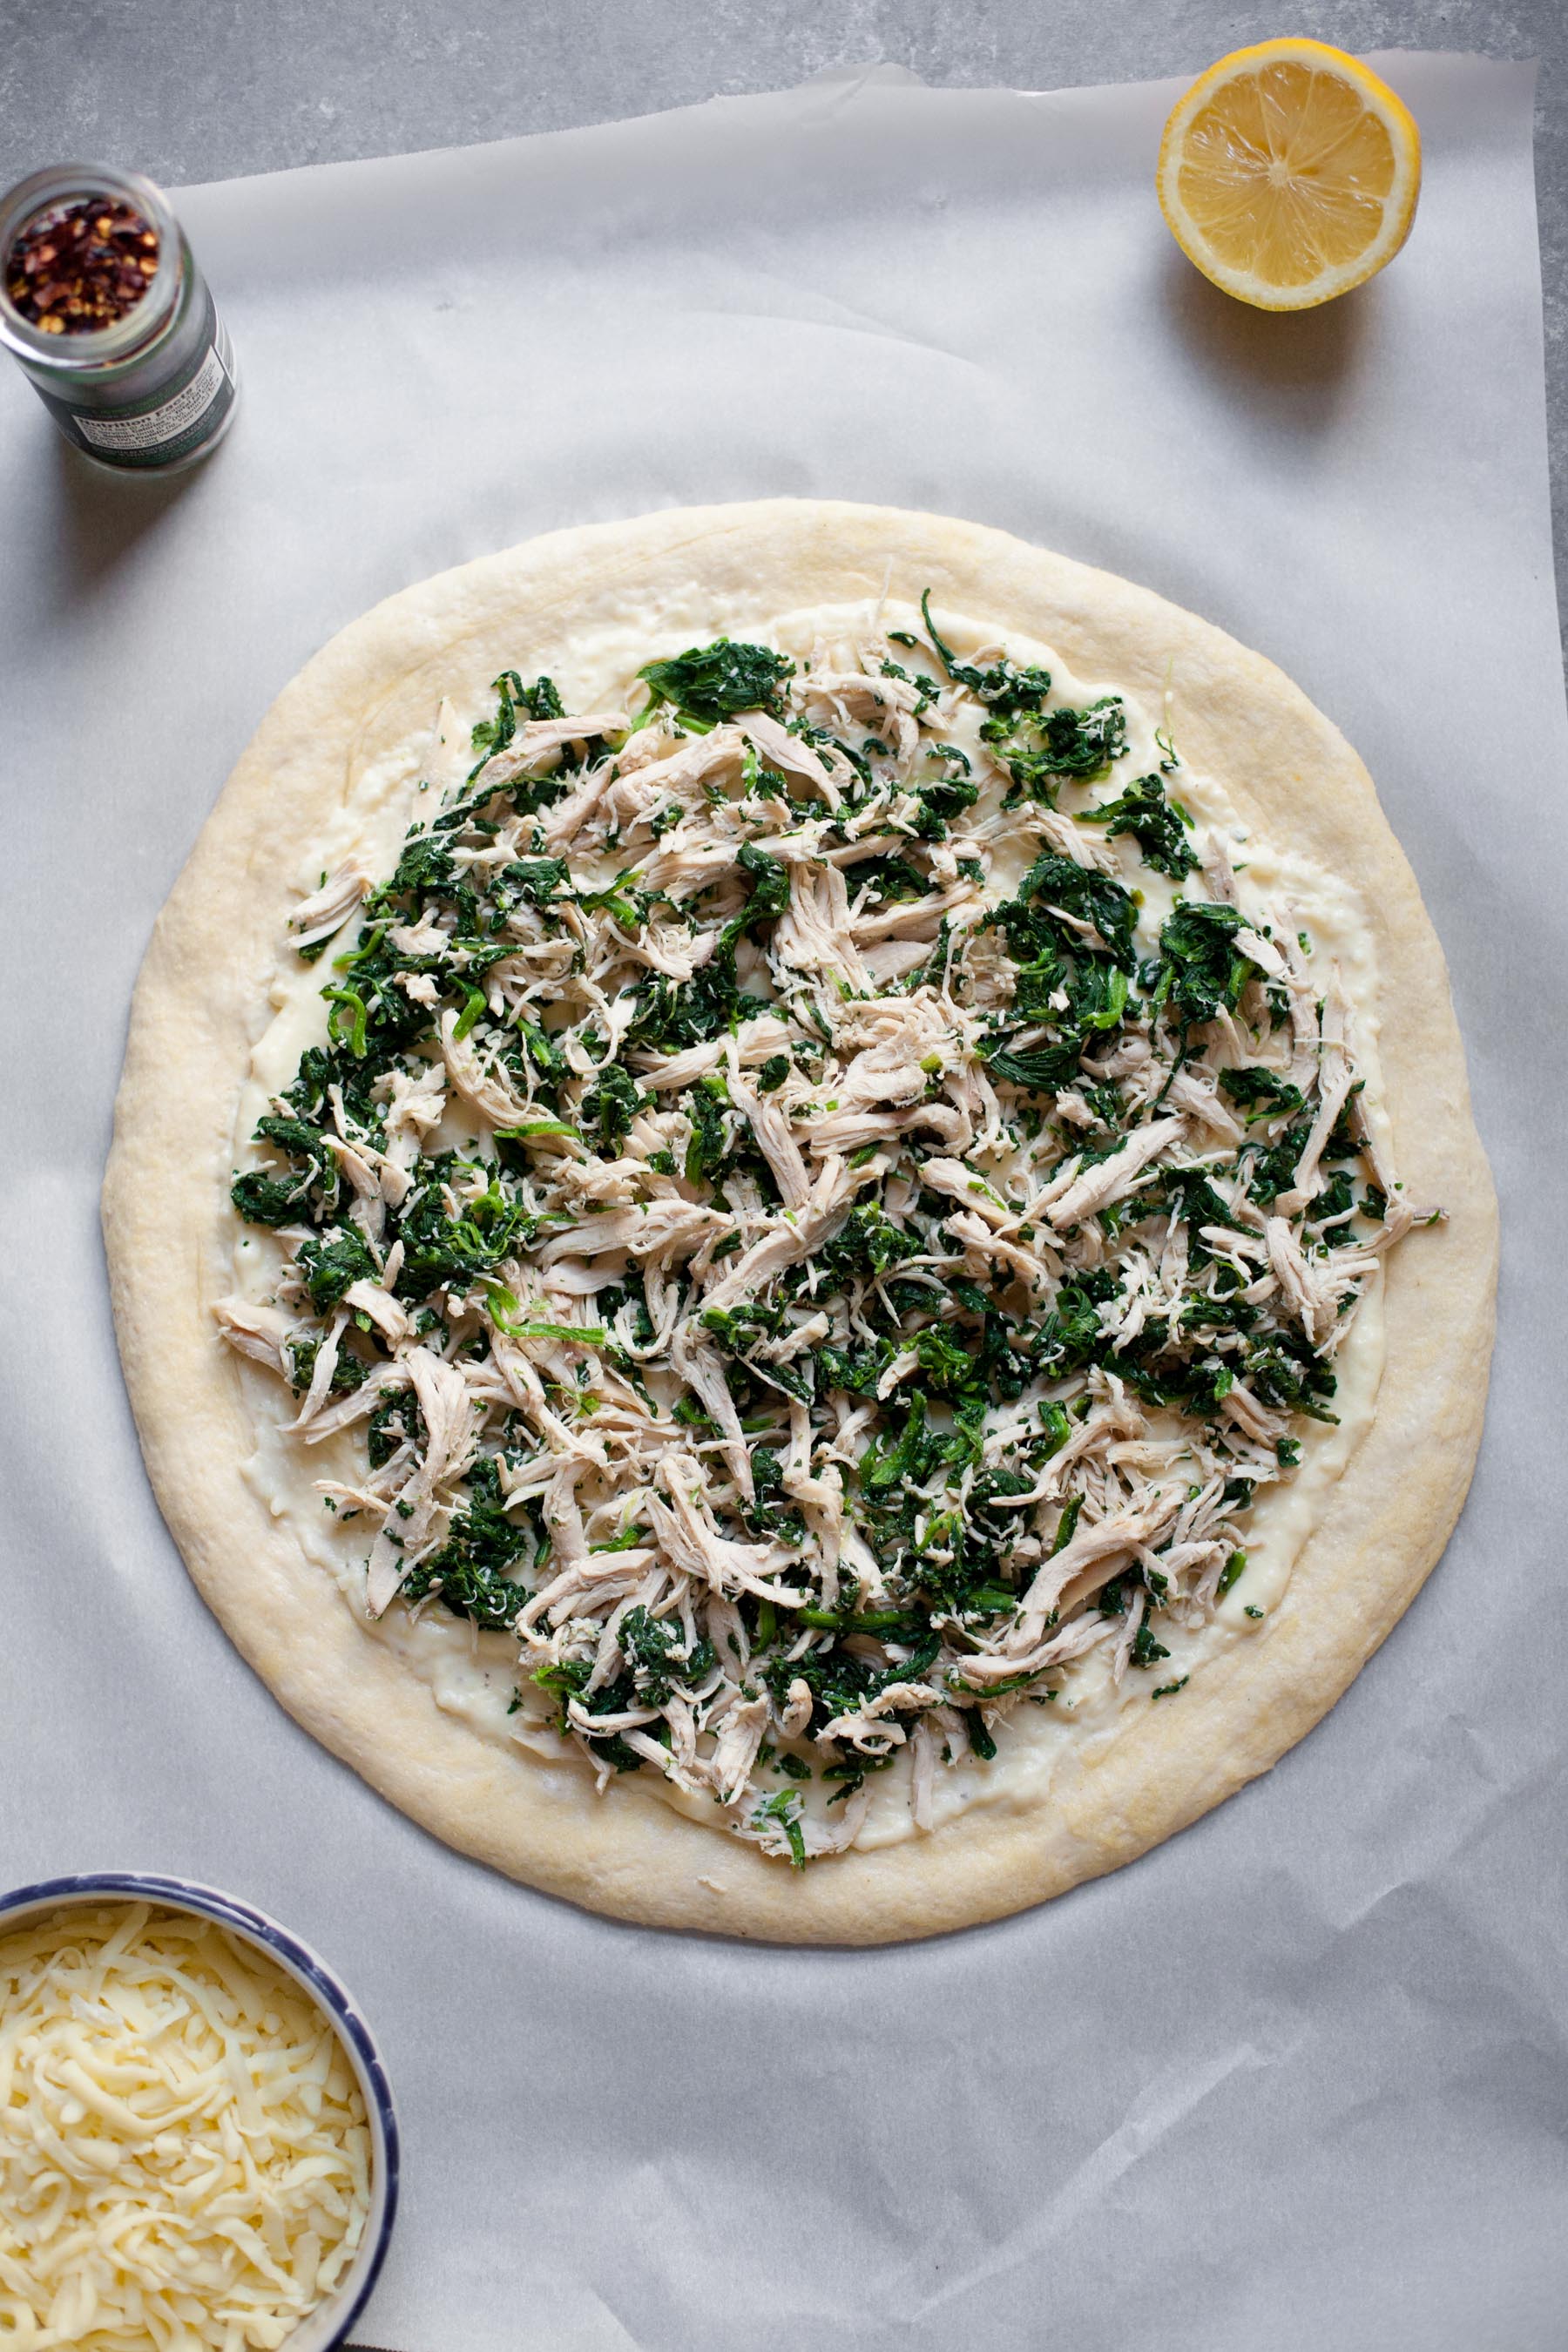 Uncooked Chicken Spinach Alfredo Pizza sits on a white background. A lemon and some spices sit nearby